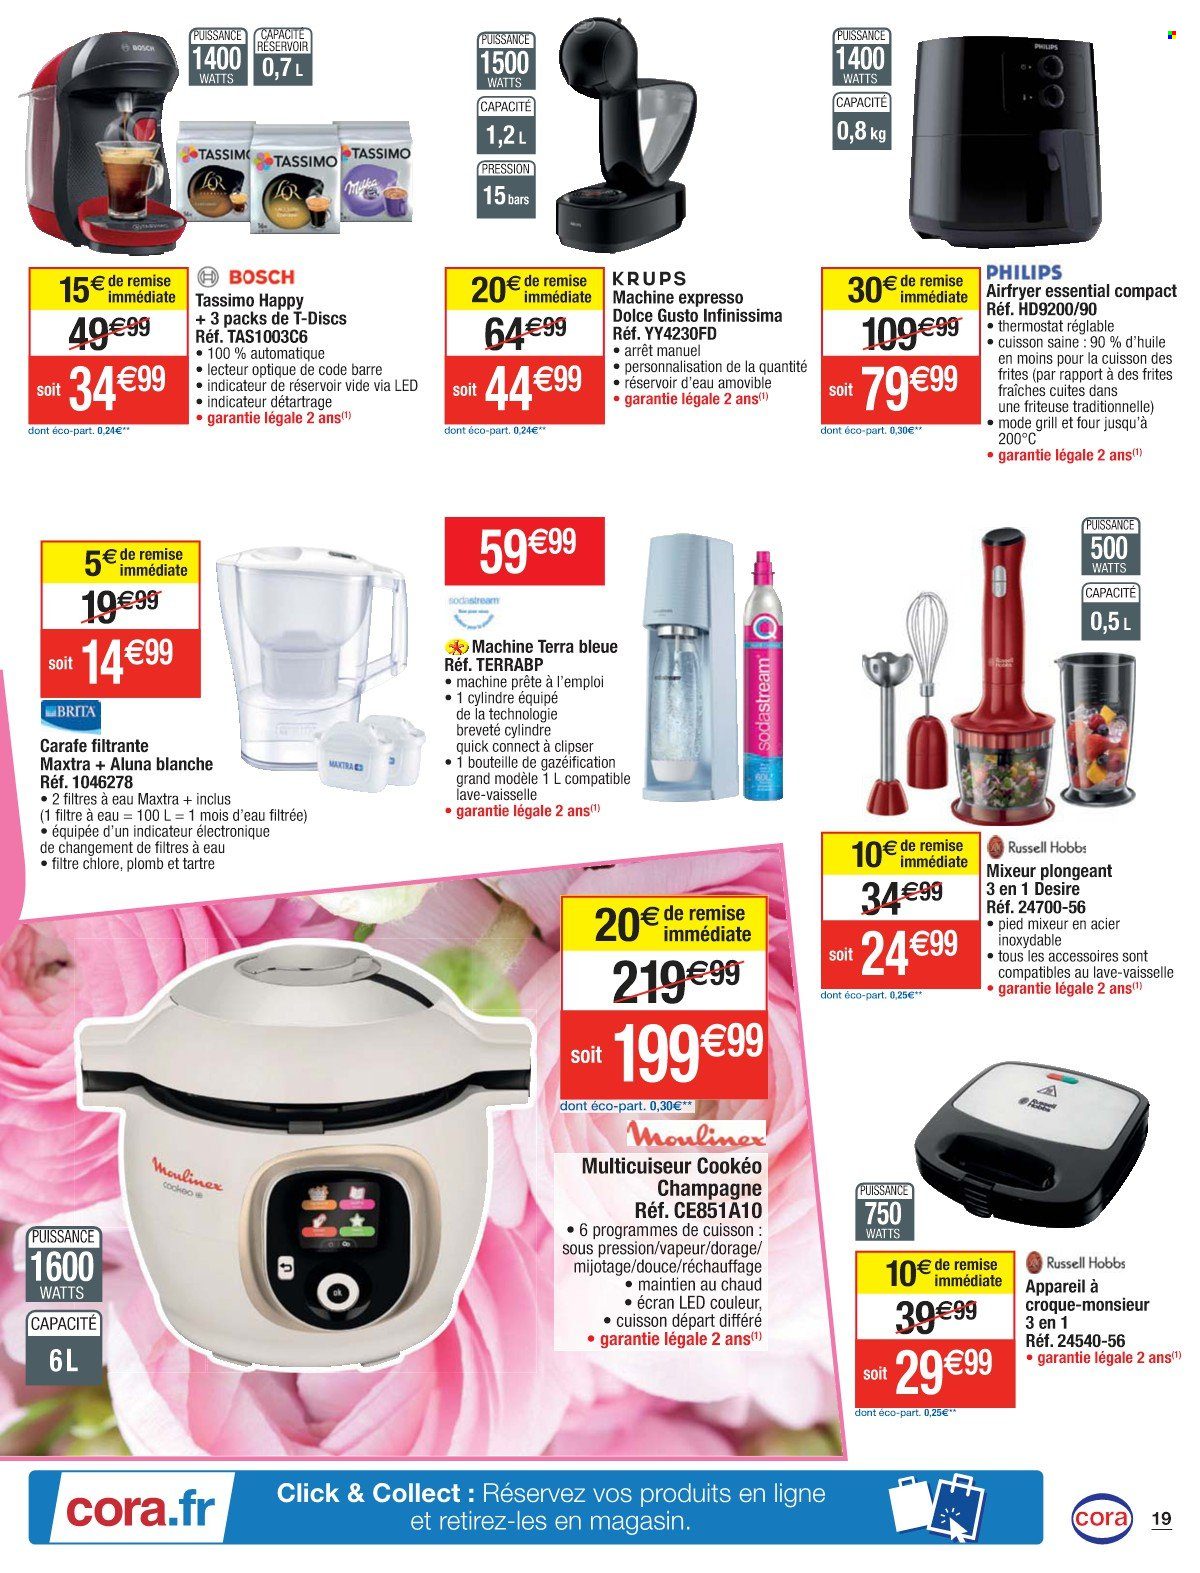 thumbnail - Catalogue Cora - 24/05/2022 - 30/05/2022 - Produits soldés - Bosch, Philips, croque-monsieur, SodaStream, Expresso, champagne, carafe, Brita, carafe filtrante, Krups, Russell Hobbs, friteuse, Moulinex, pied mixeur, mixeur, grill. Page 19.